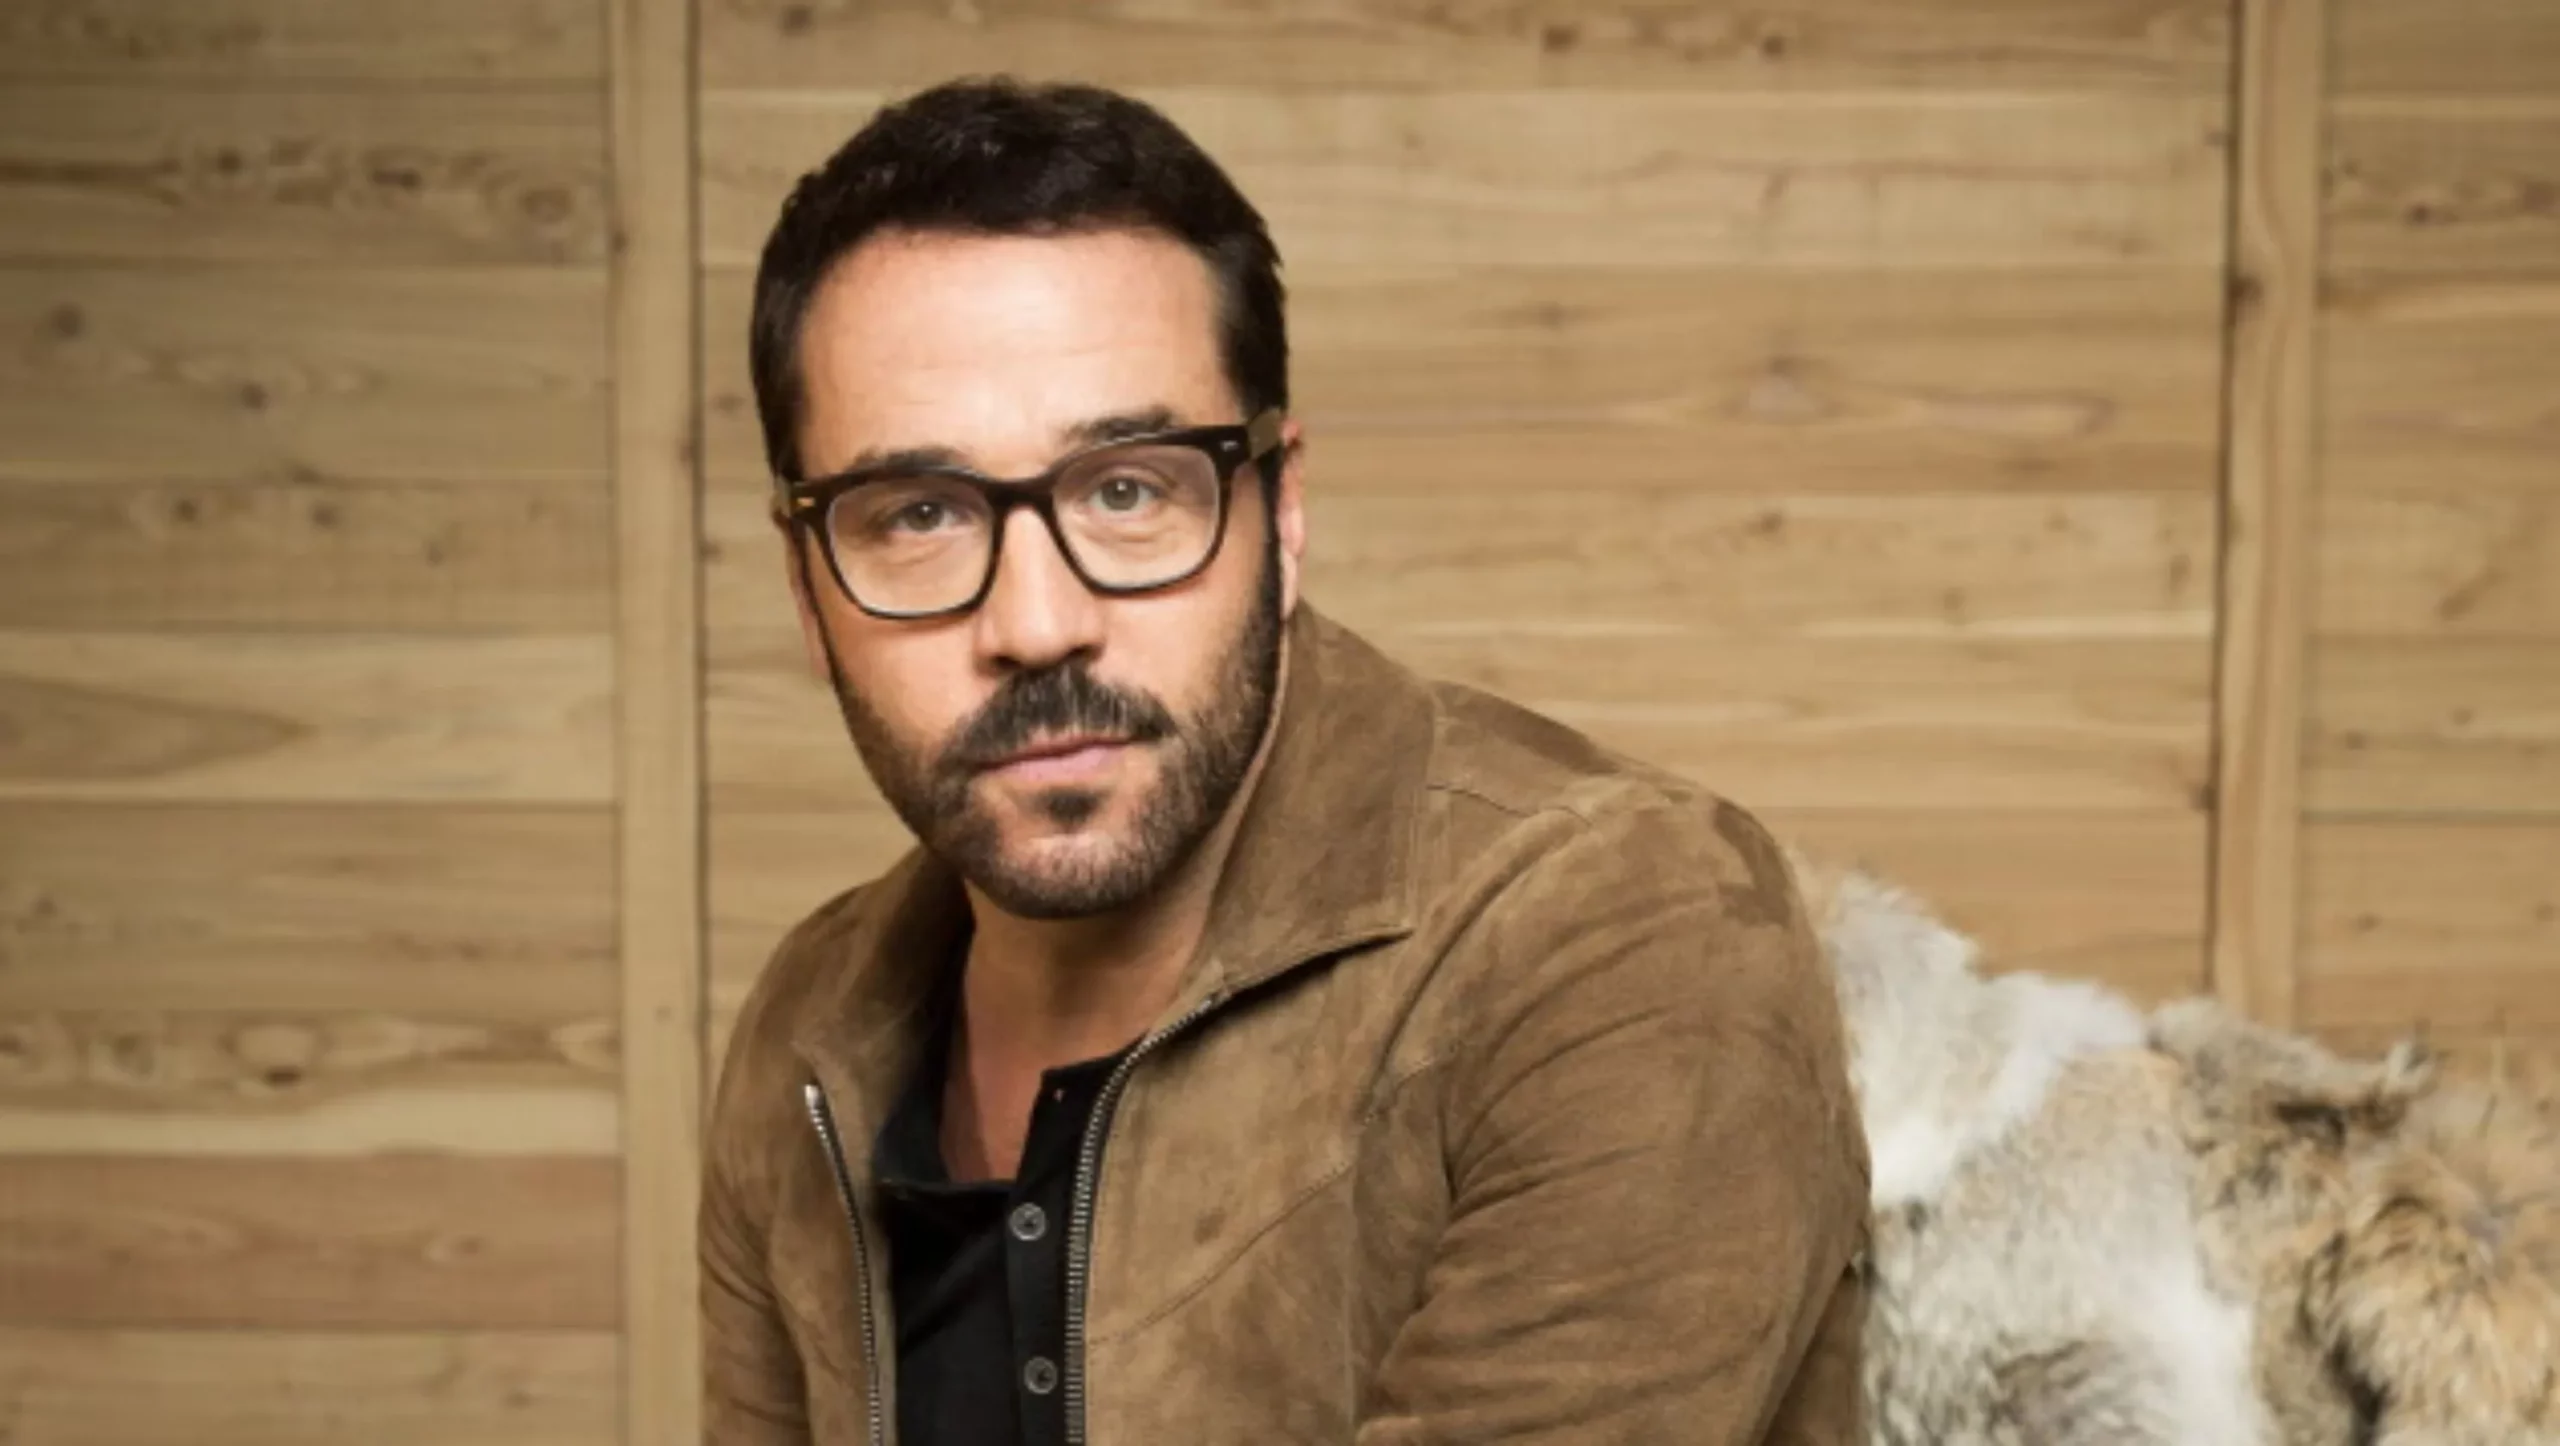 Jeremy Piven's Hair Transplant: The Procedure, Results, And Recovery